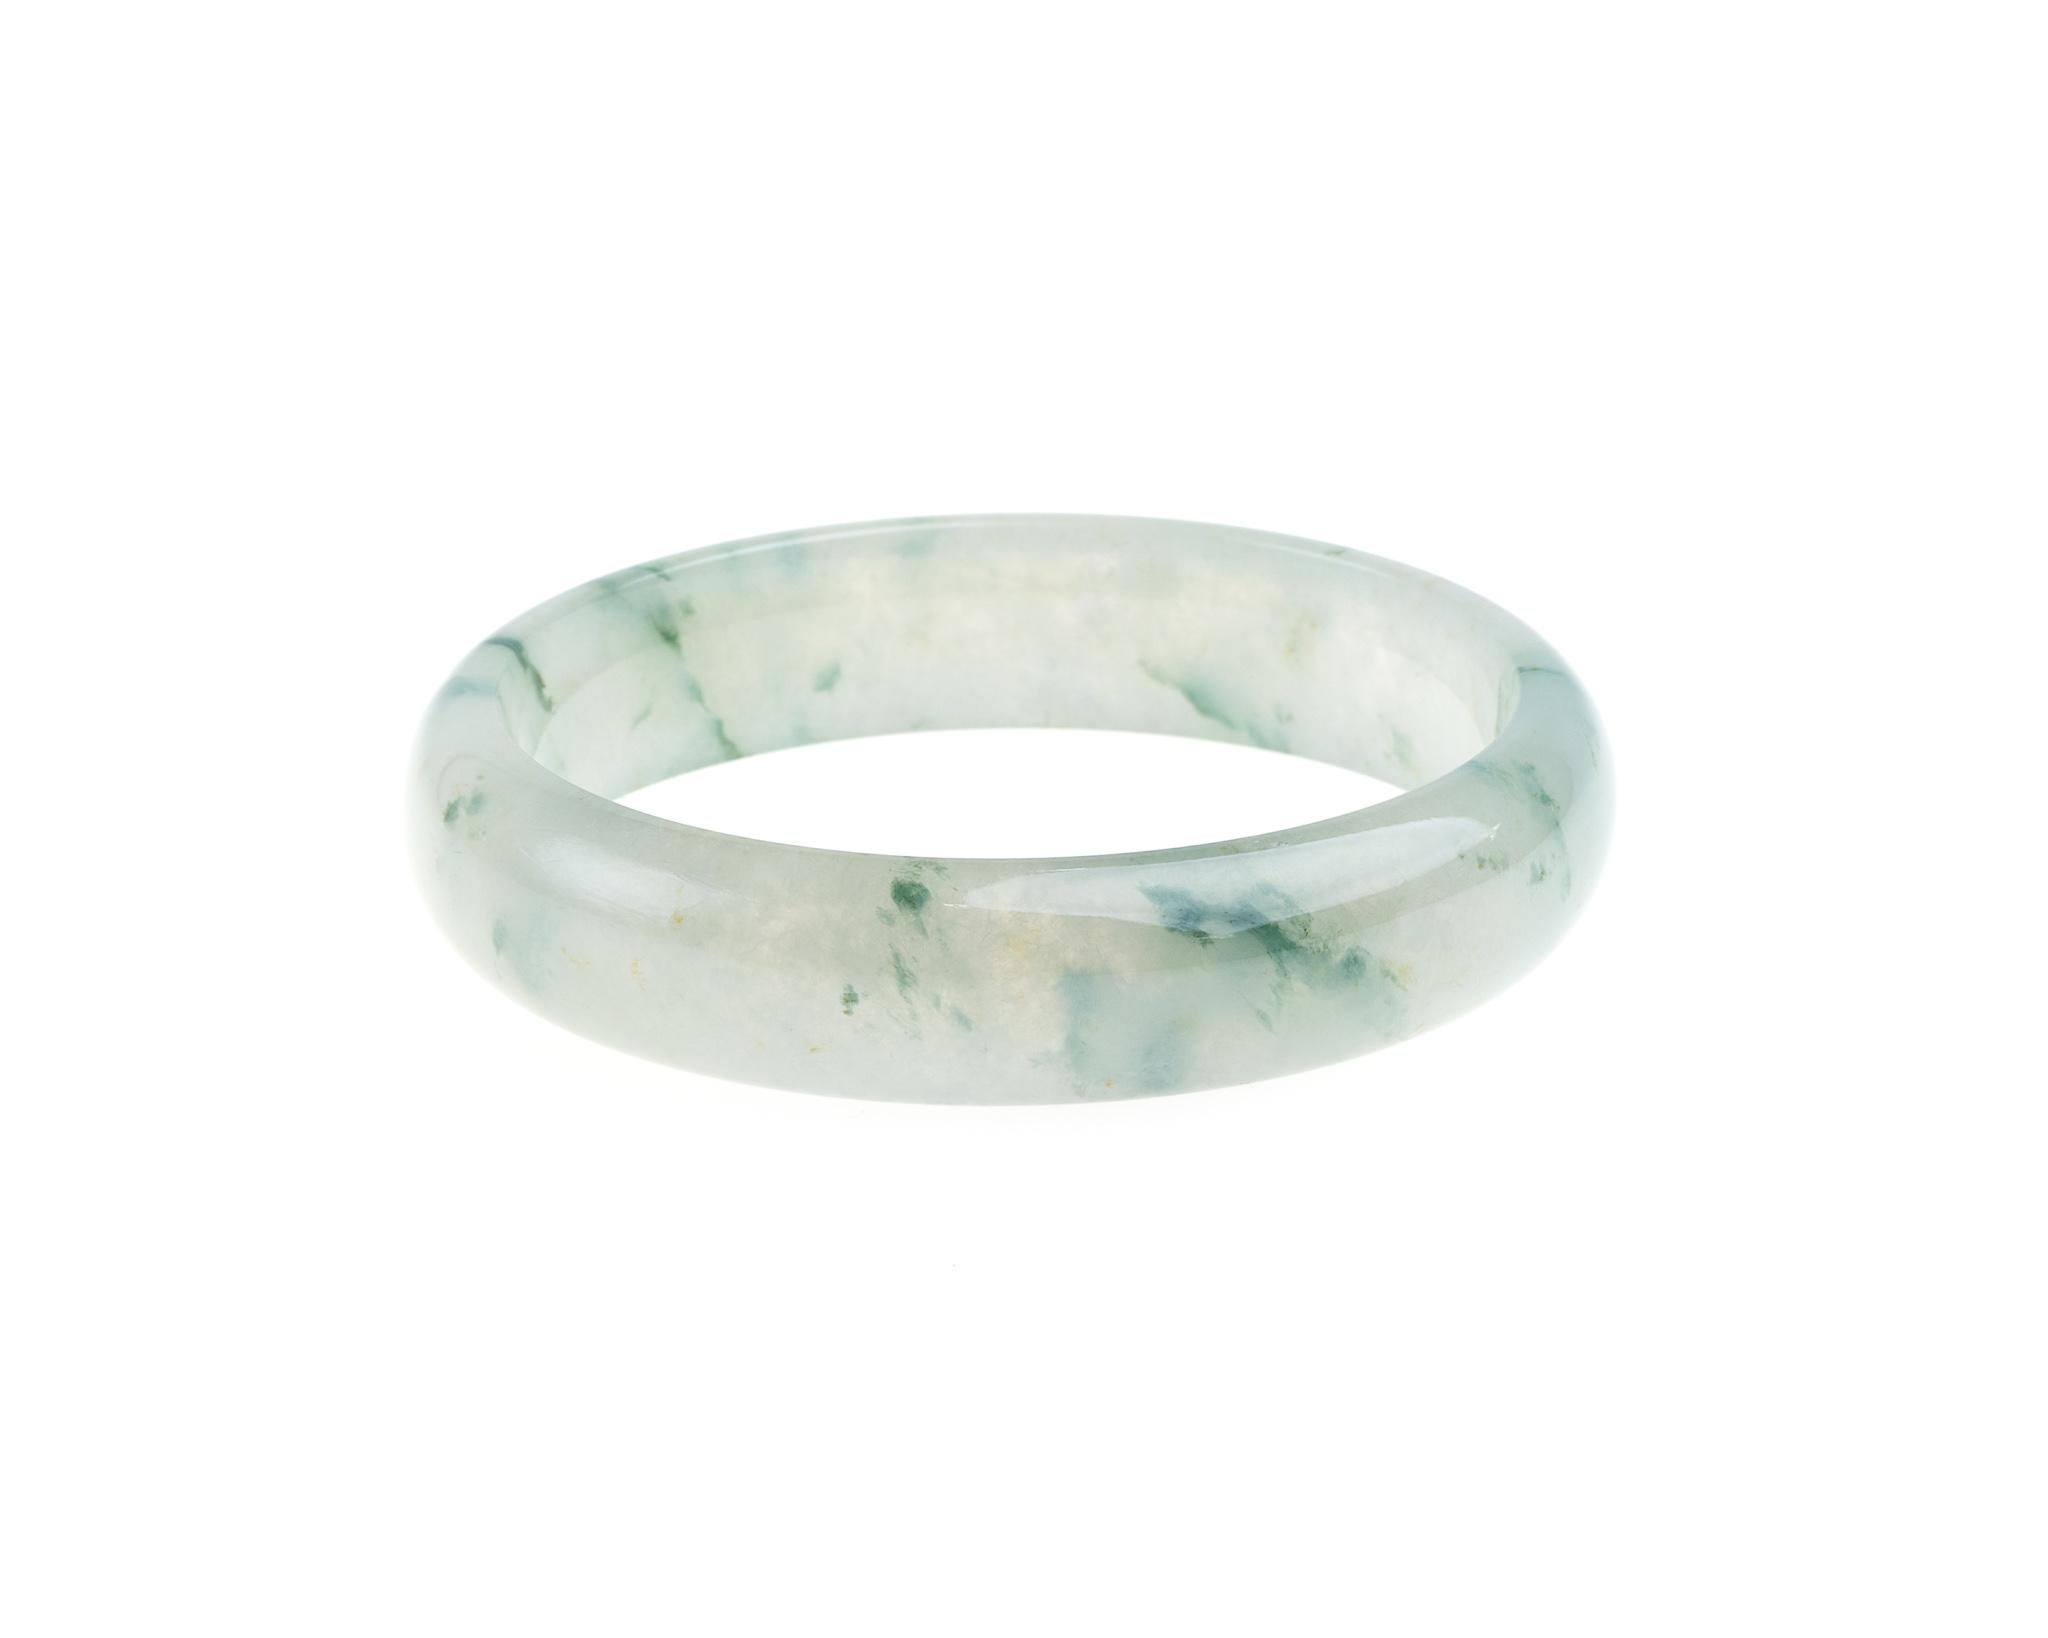 This all natural, untreated ice jadeite jade in green veins. 

The bangle's inner diameter is 2.30 inches (58.4mm) and outer diameter 2.83 inches (71.9mm) with the bangle width of 0.56 inches (14.2mm). 

Included is a Hong Kong Gems Laboratory Jade